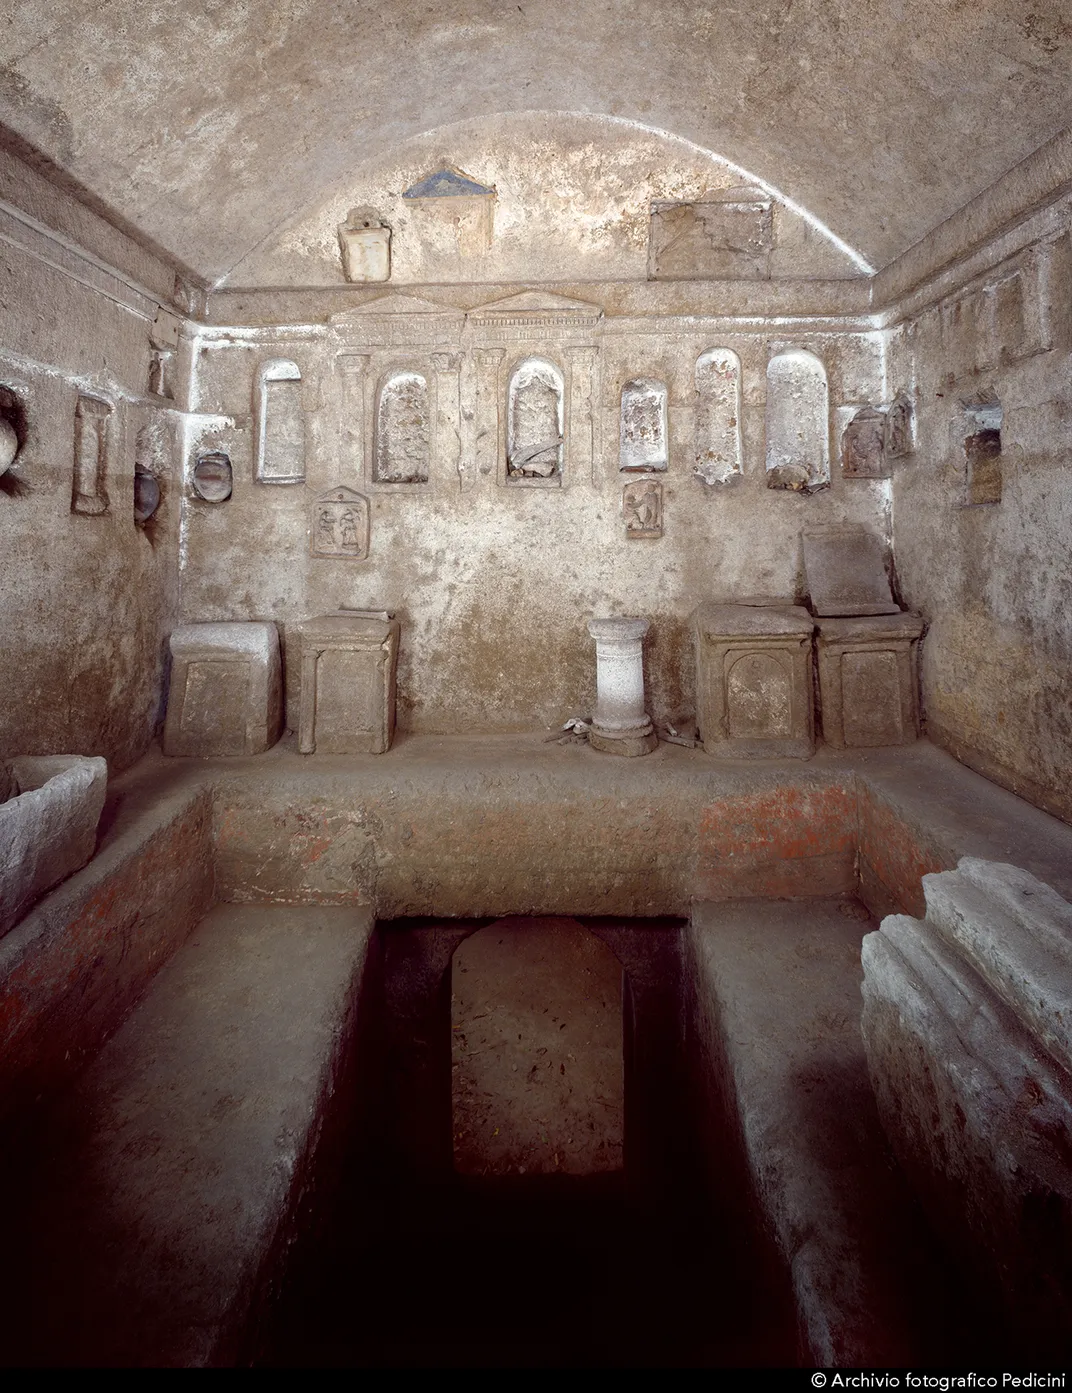 View of upper burial chamber, where funerary urns sit in niches above benches carved for mourners